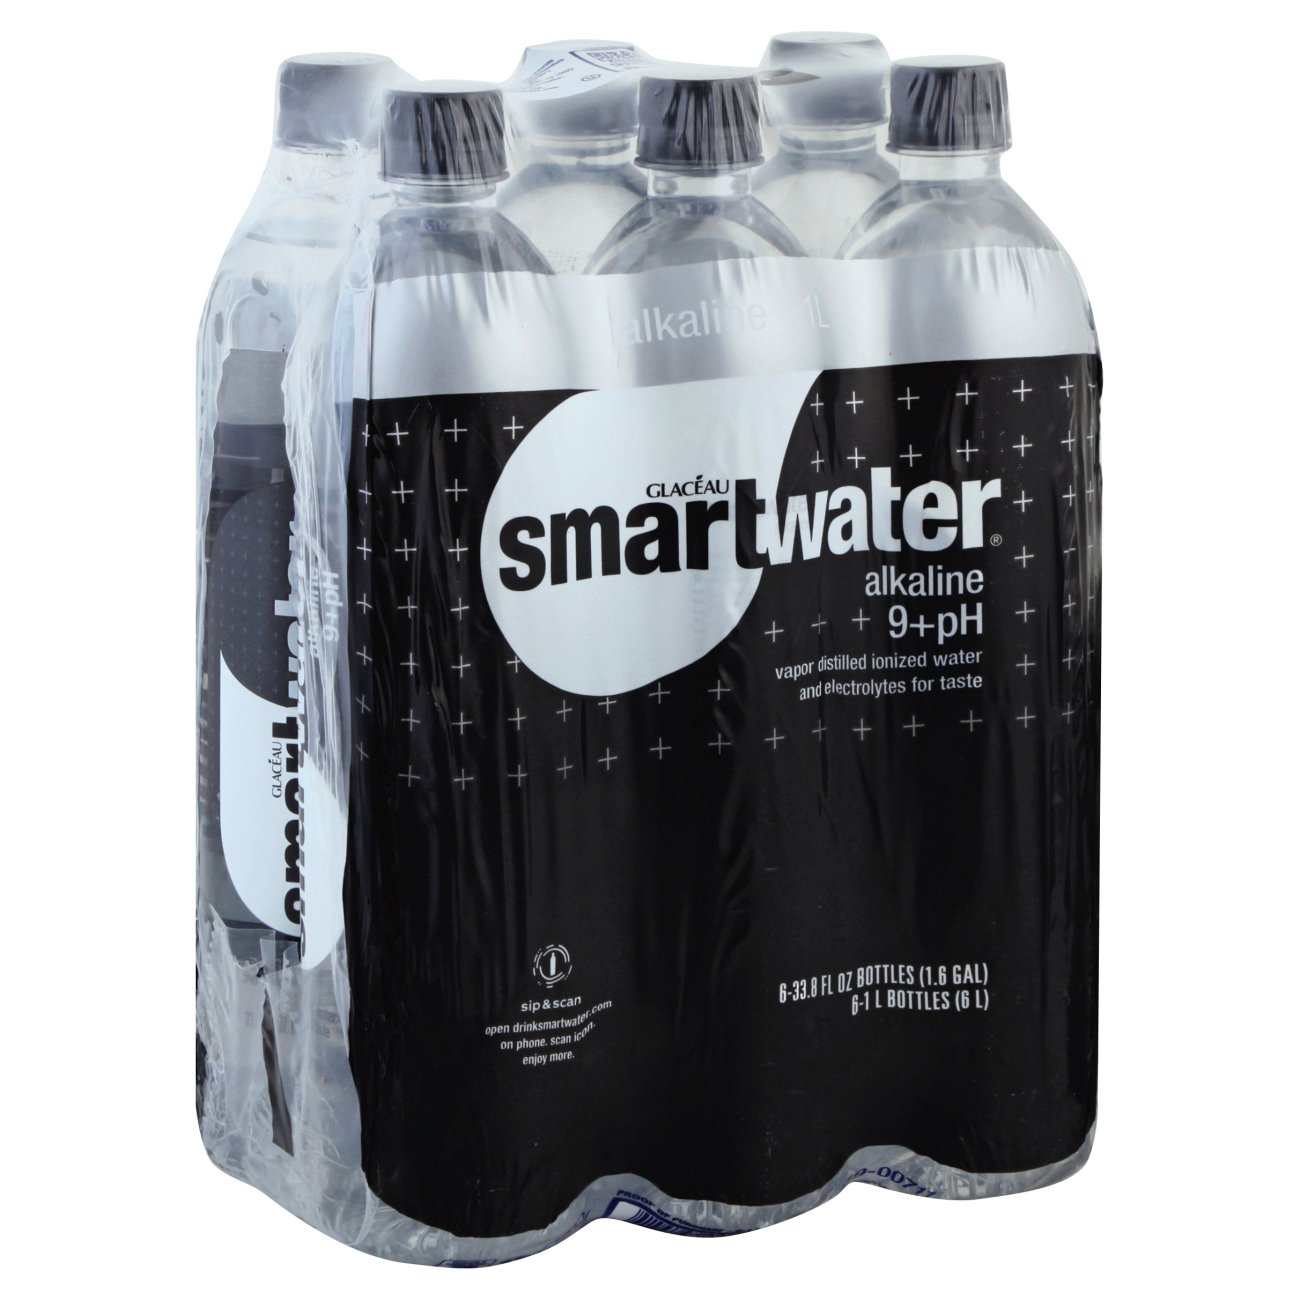 glaceau-smartwater-alkaline-9-ph-water-1-l-bottles-shop-water-at-h-e-b